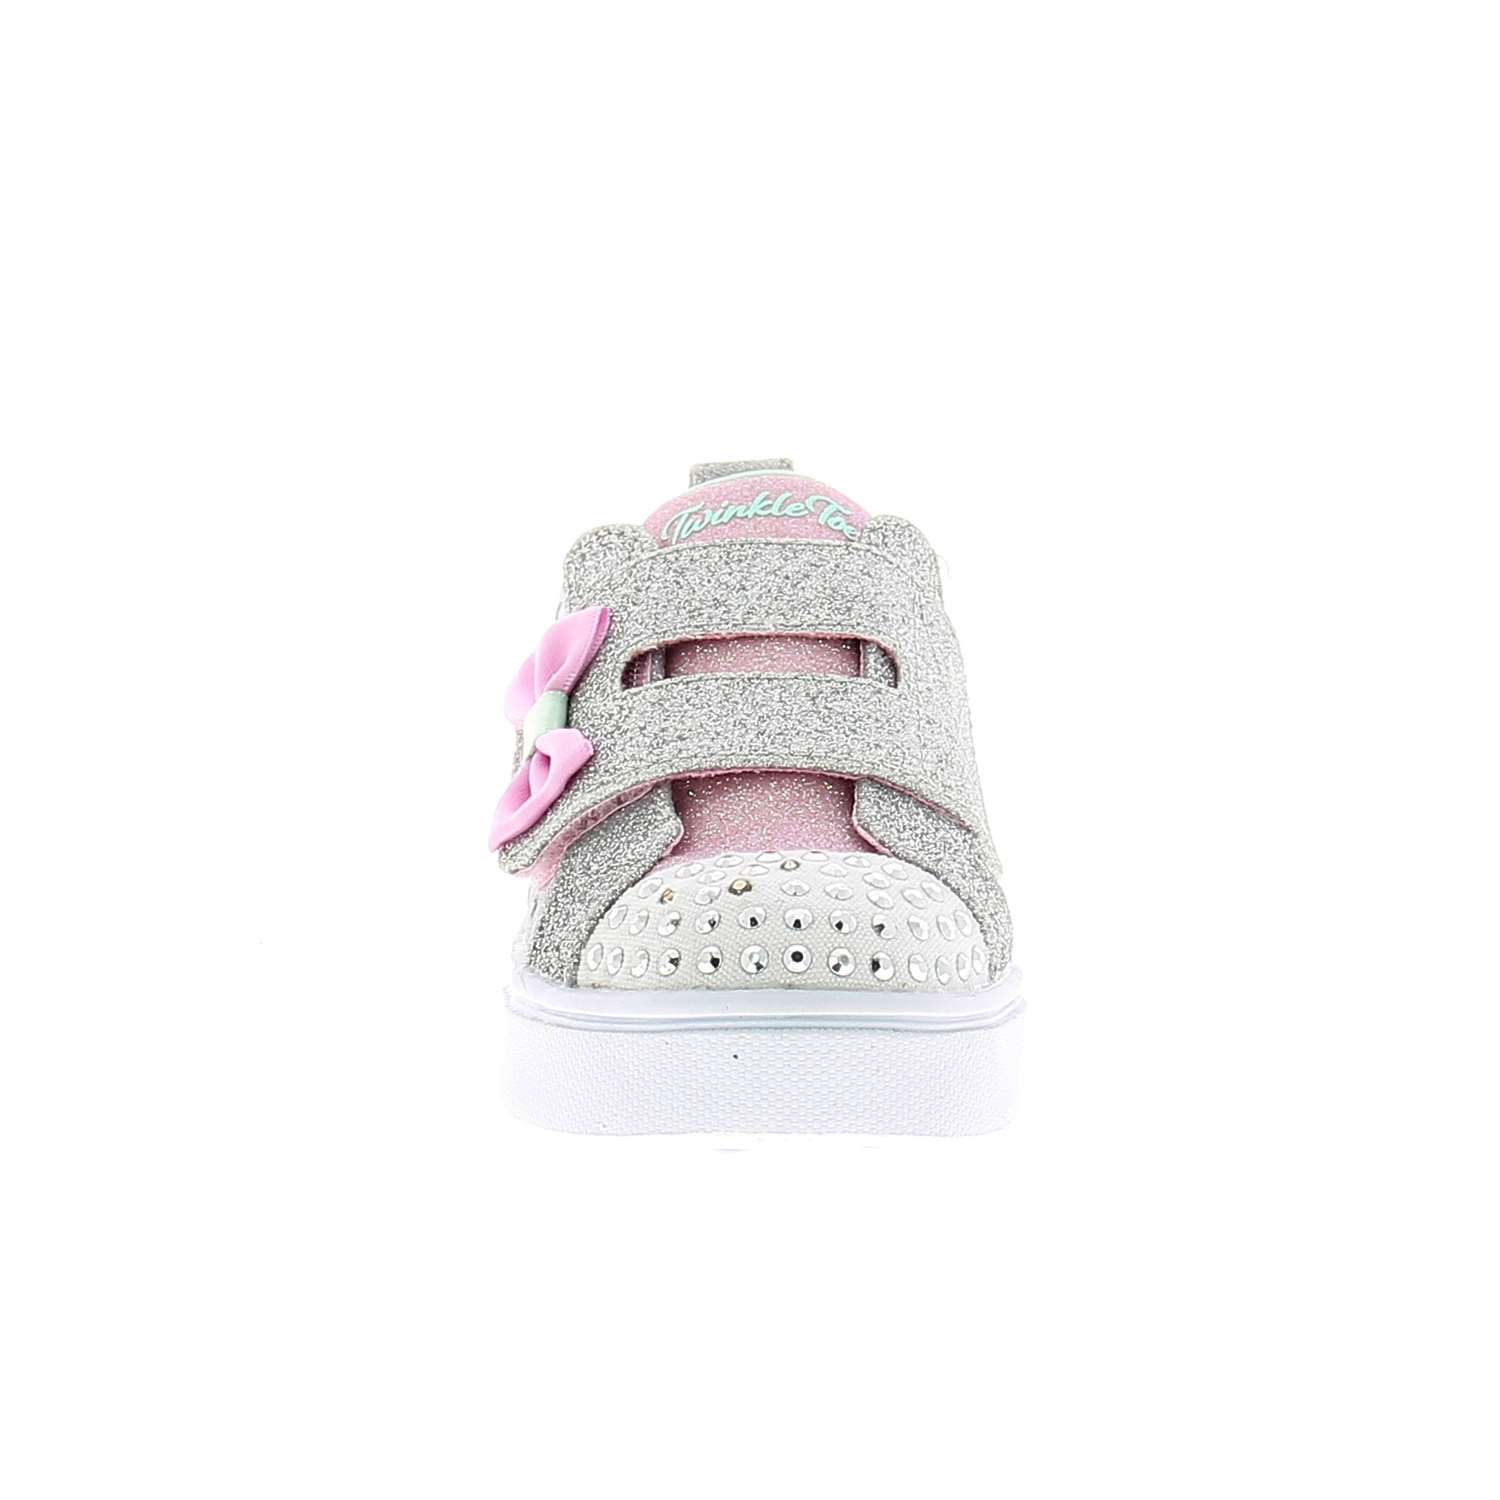 03 - TWINKLE TOES - SKECHERS - Baskets - Synthétique